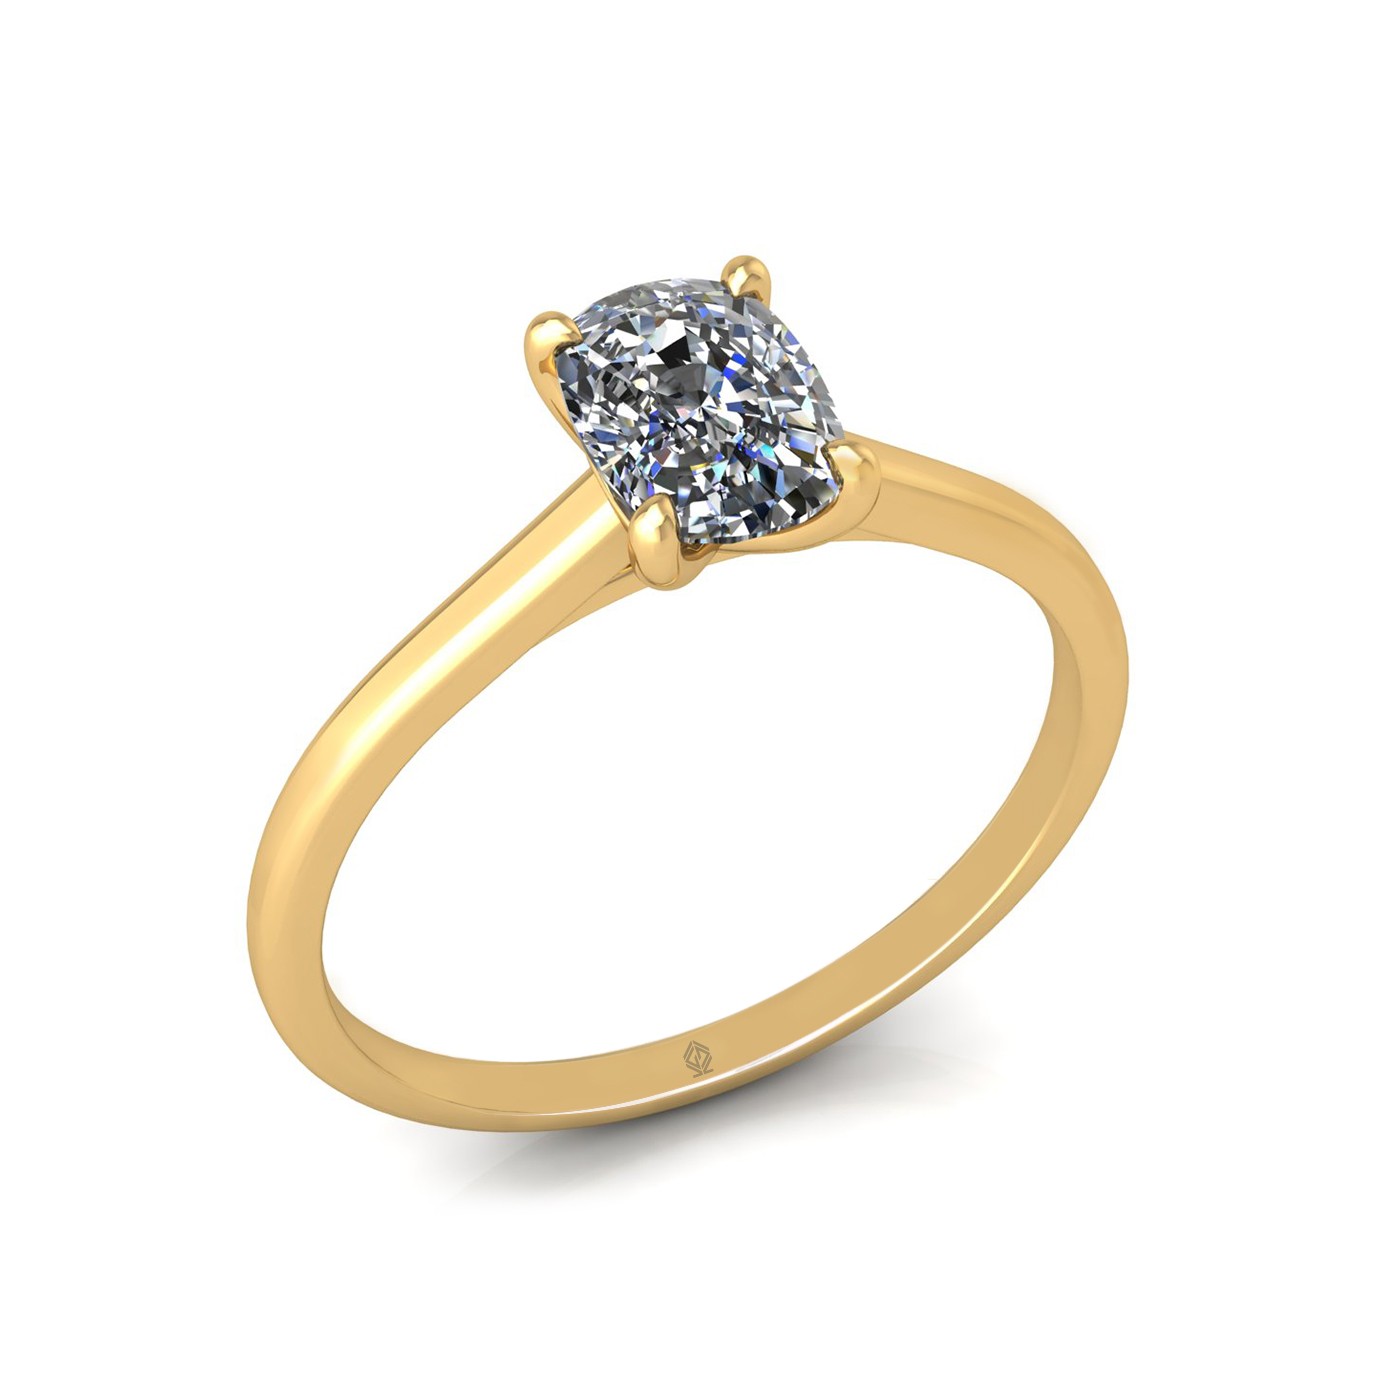 18k yellow gold 1,00 ct 4 prongs solitaire elongated cushion cut diamond engagement ring with whisper thin band